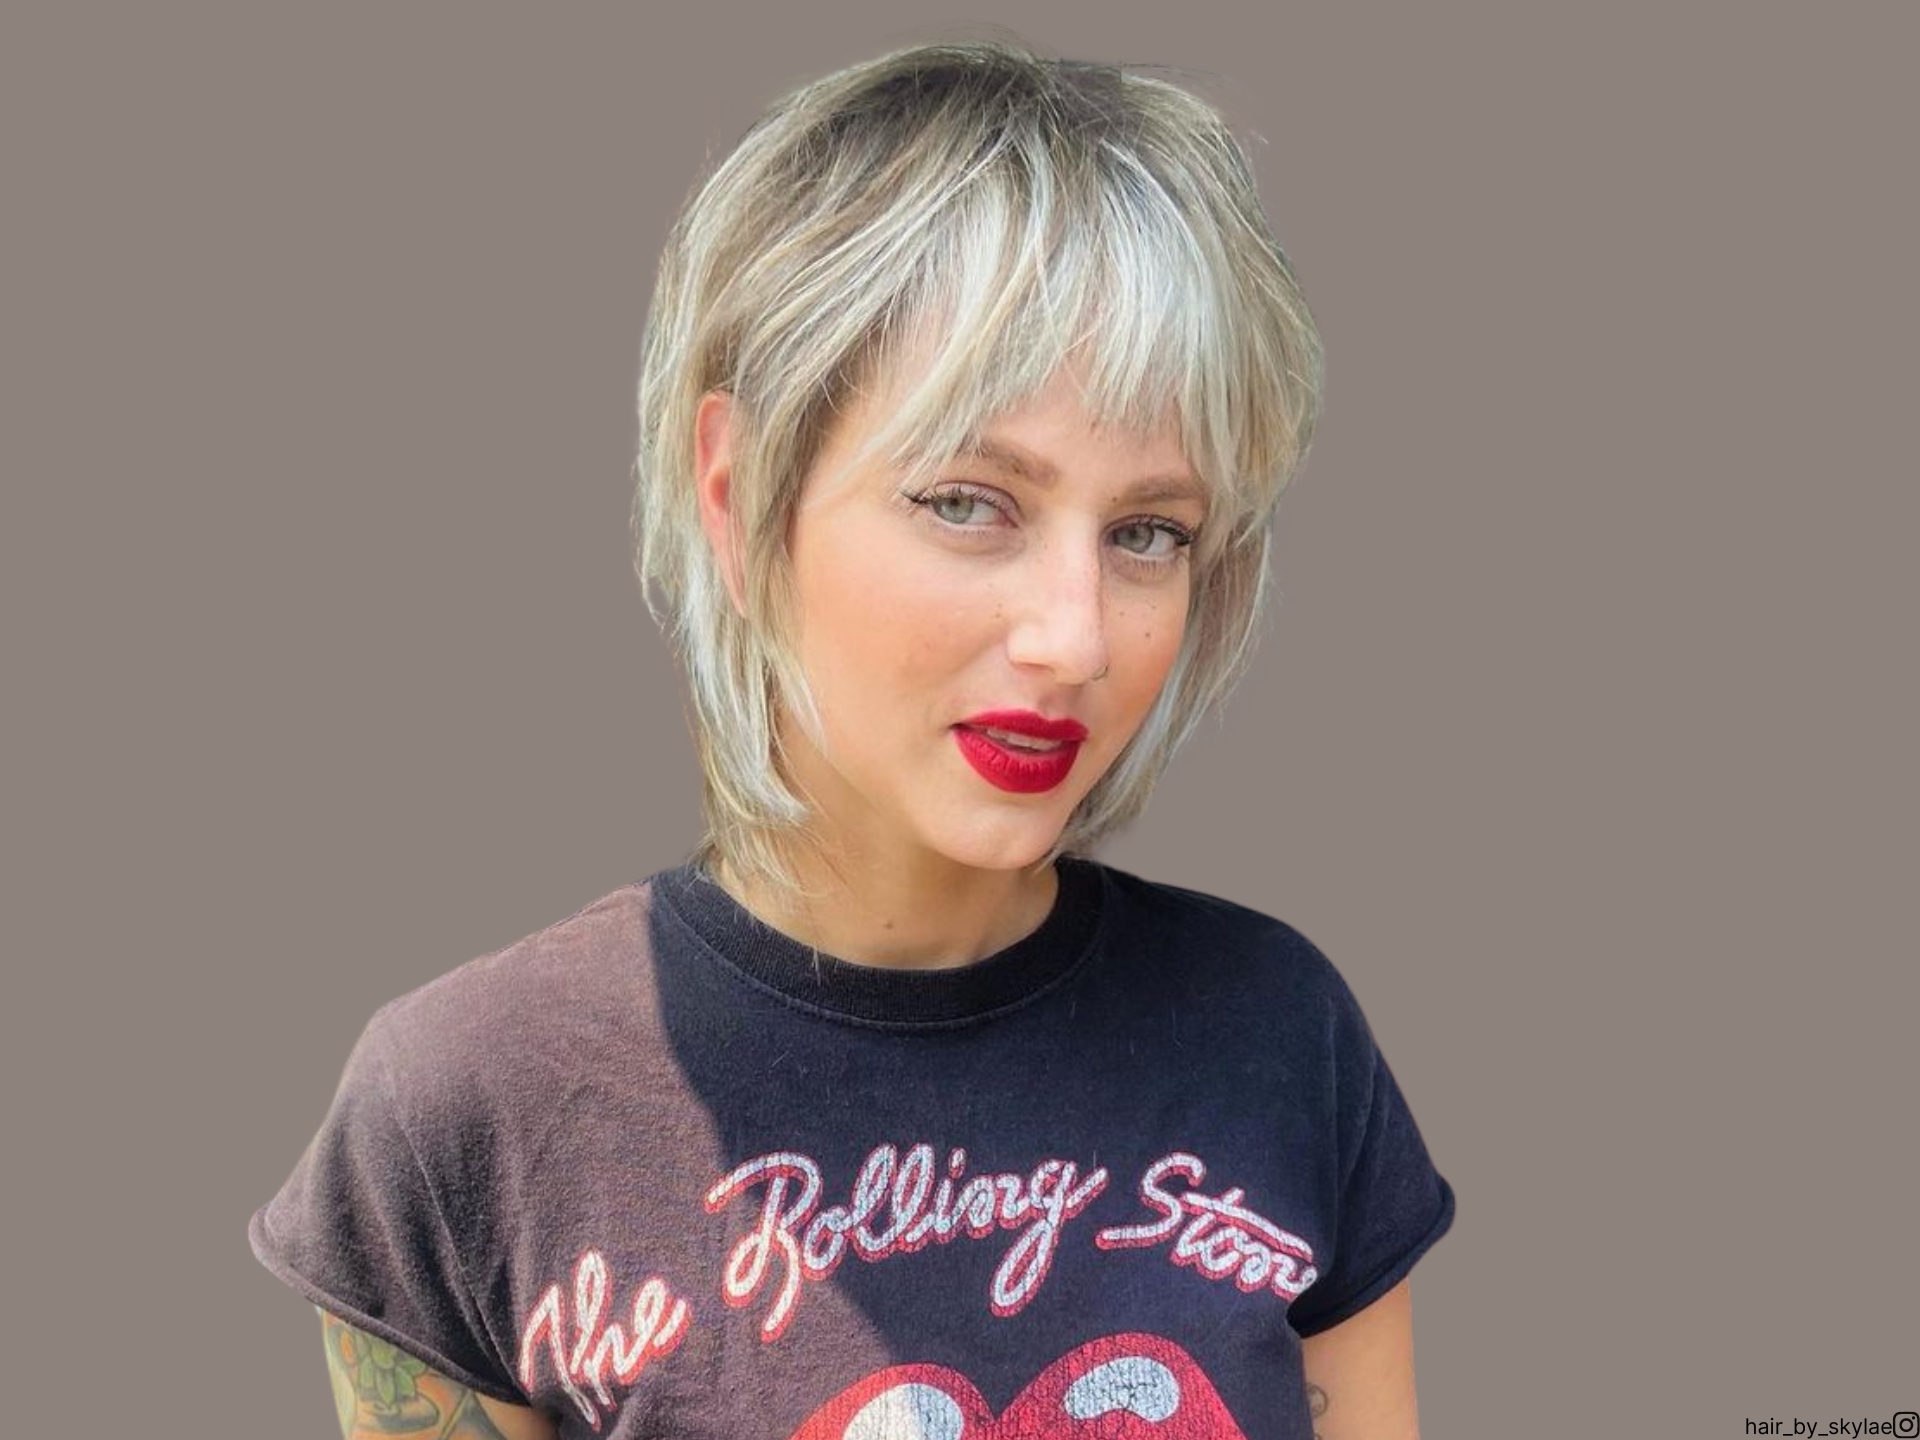 20 Chic Short Shag With Bangs Ideas For A Rock’n’Roll Vibe